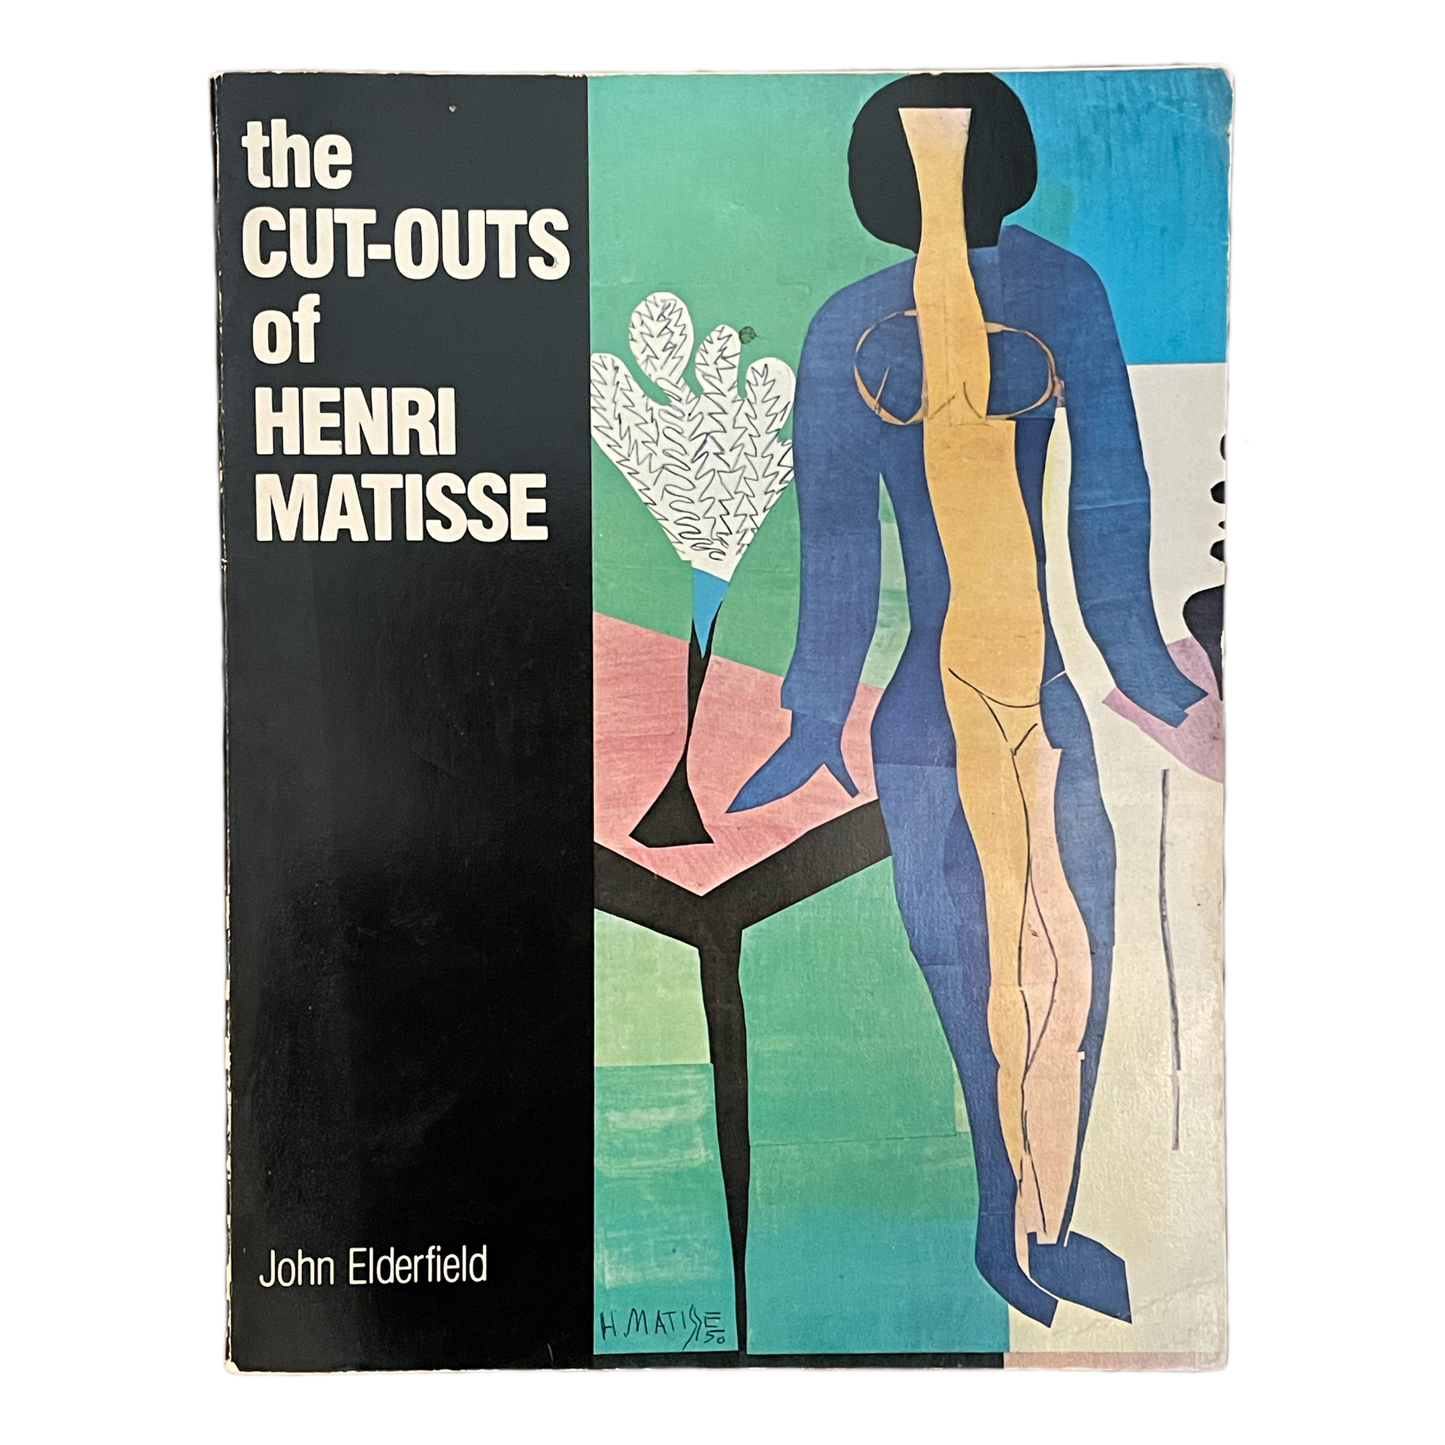 The Cut-Outs of Henri Matisse Book